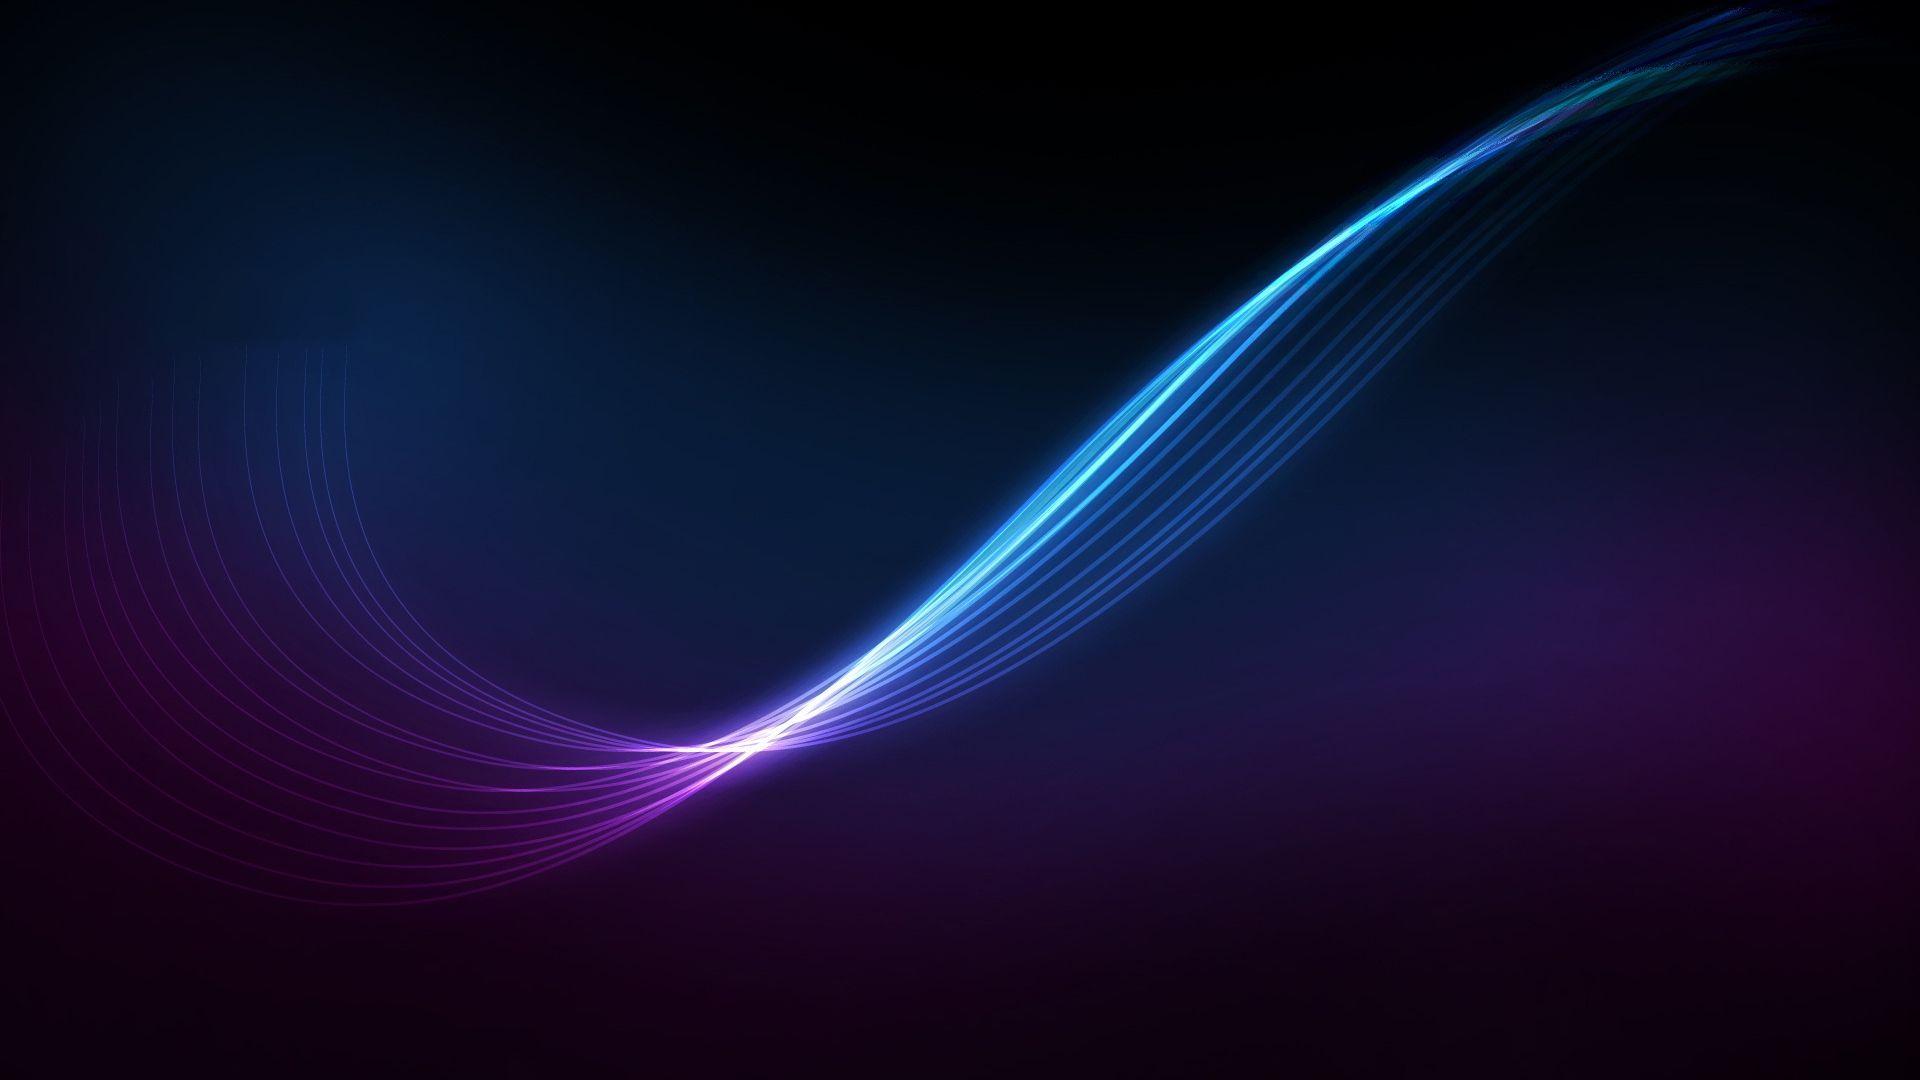 Purple And Turquoise Wallpapers Top Free Purple And Turquoise Backgrounds Wallpaperaccess